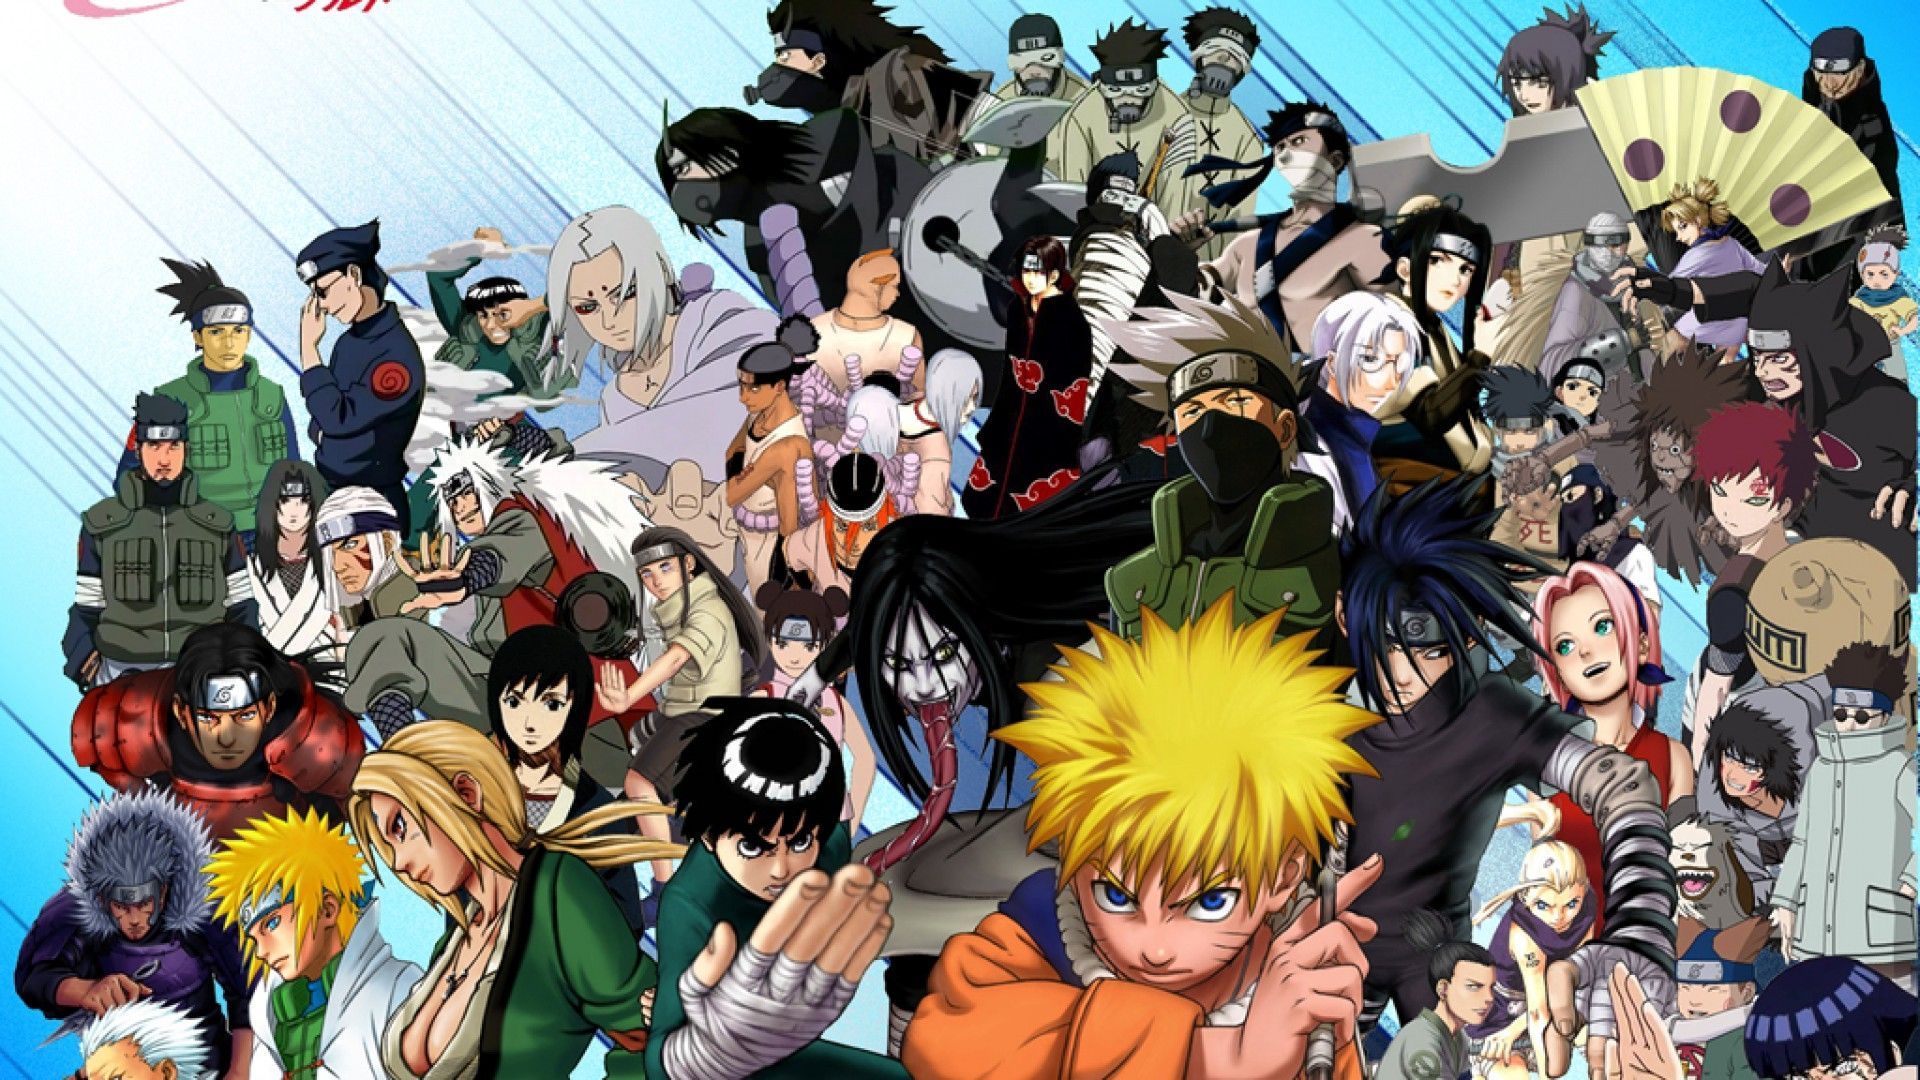 Anime Collage Wallpaper Free Anime Collage Background